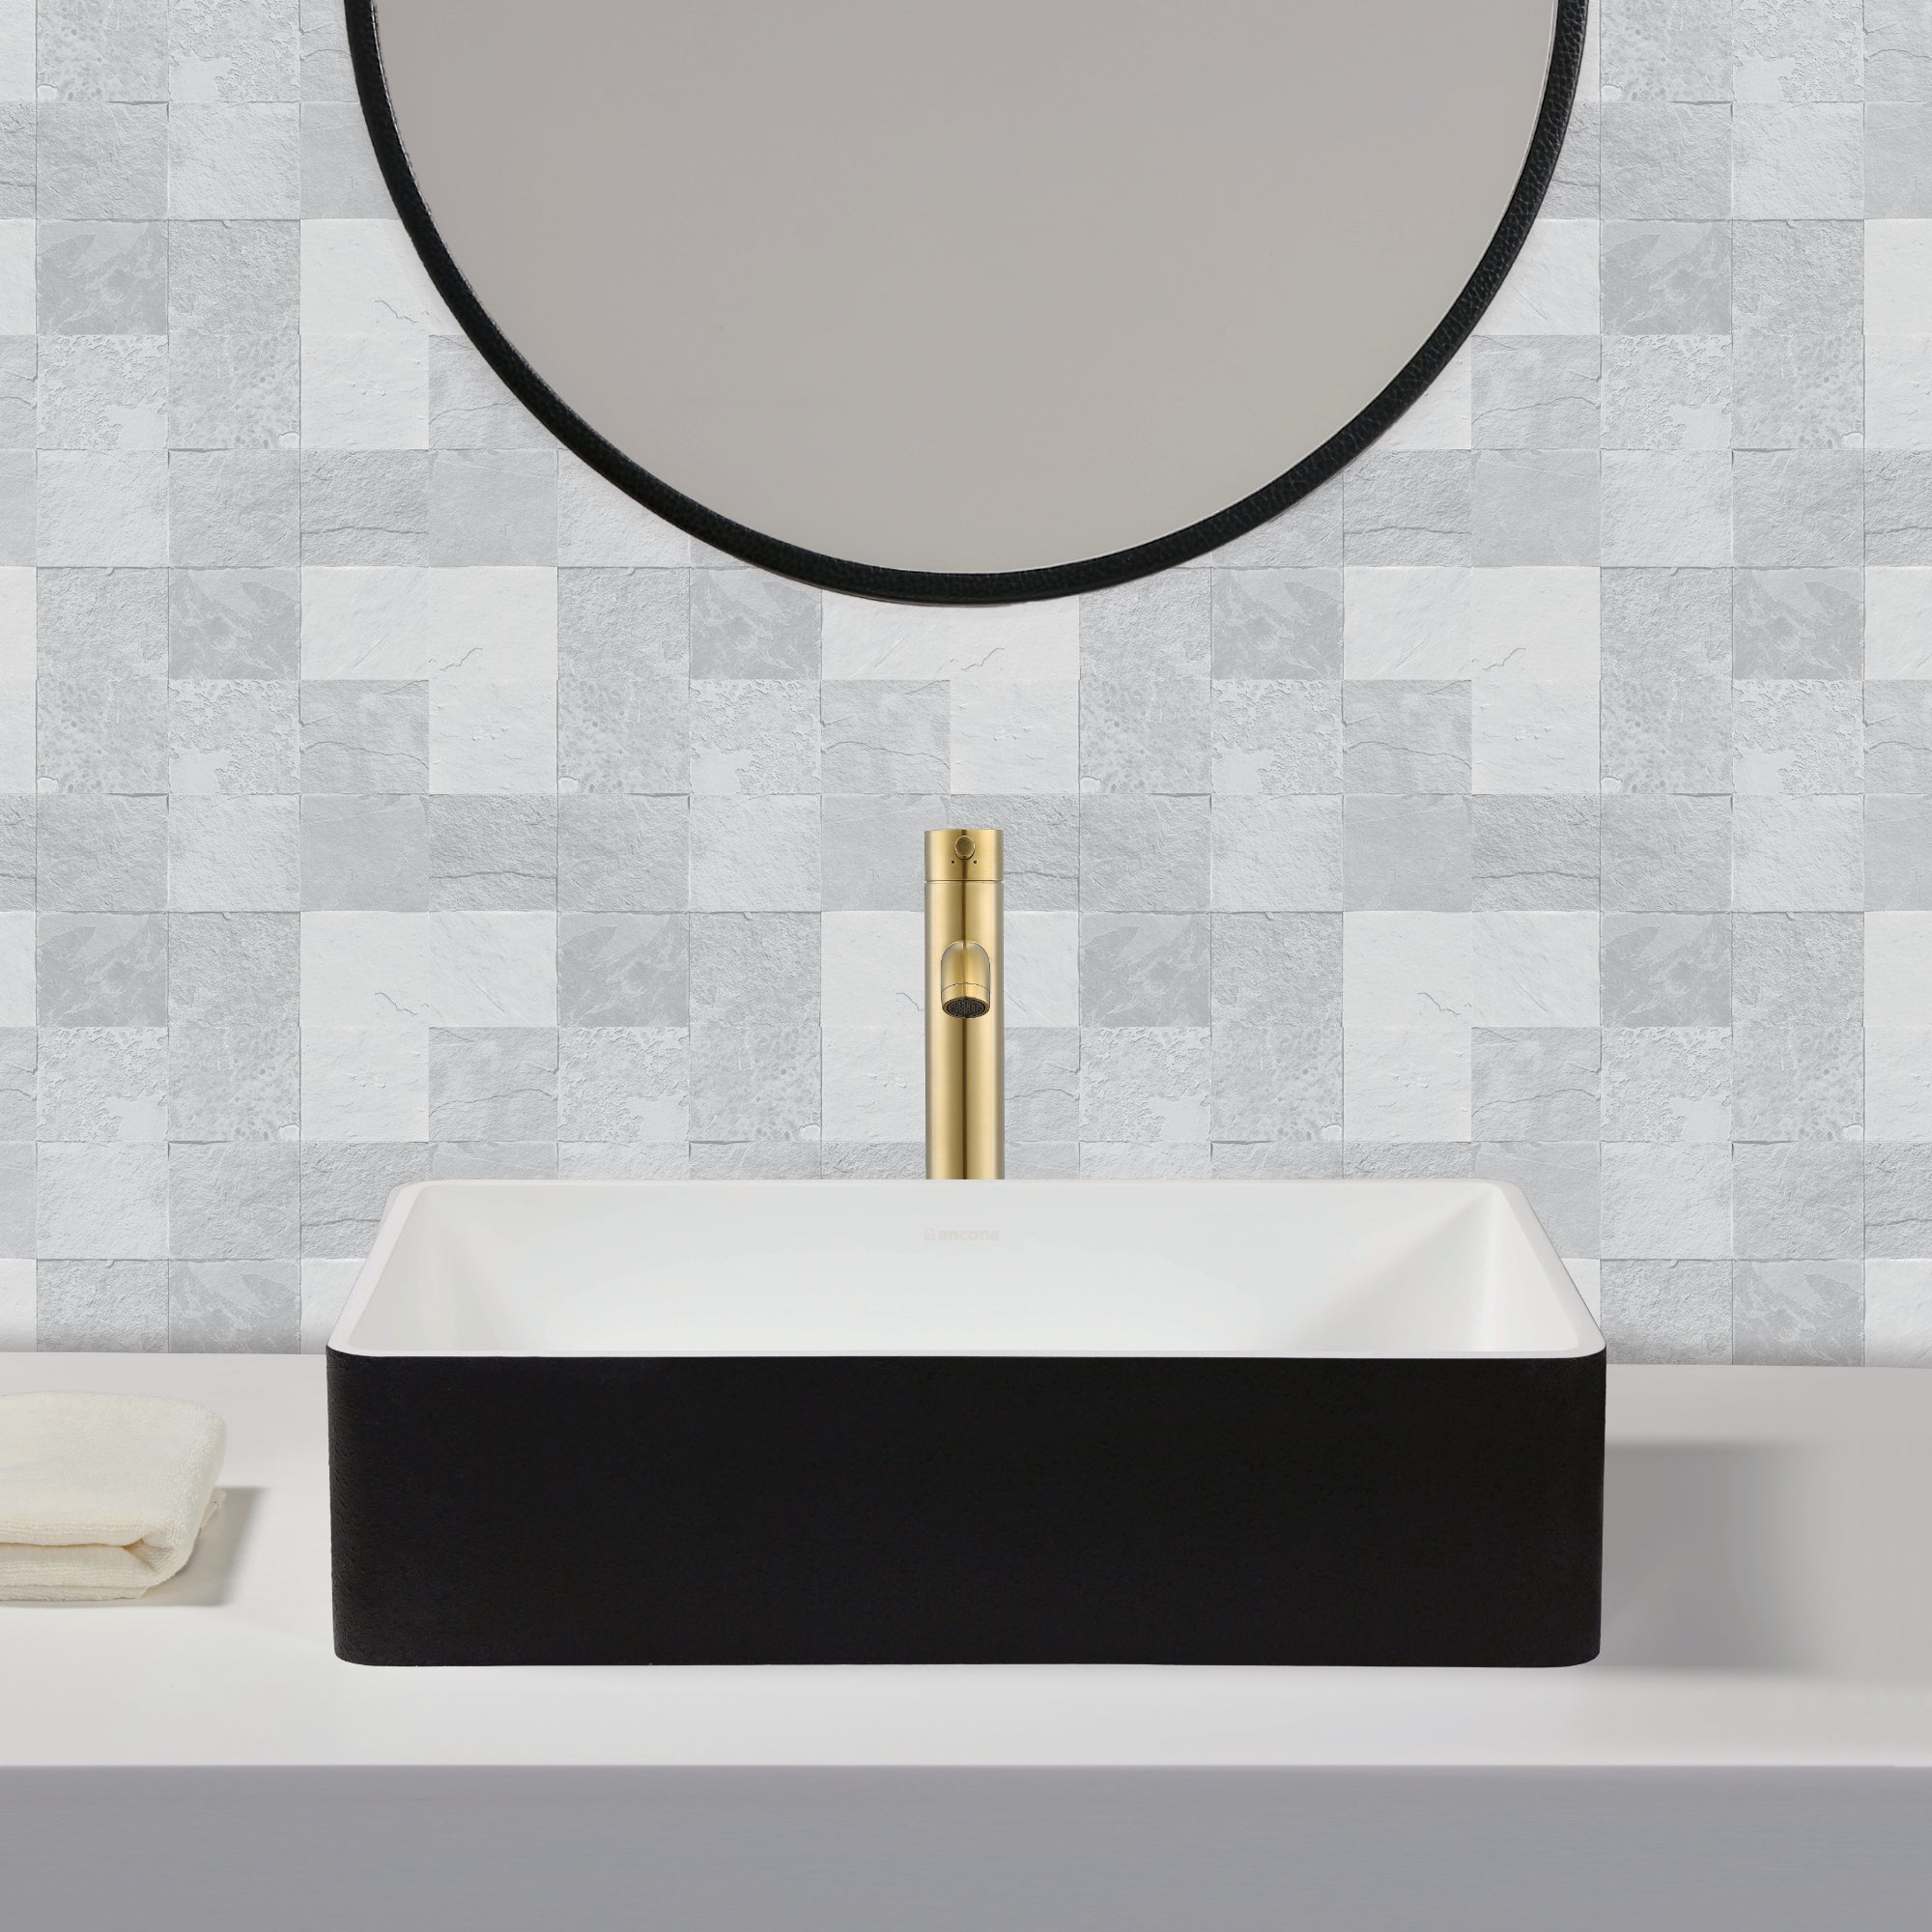 Ancona Holbrook Bathroom Vessel Sink in Black and White with Argenta Vessel Bathroom Faucet in Brushed Champagne Gold